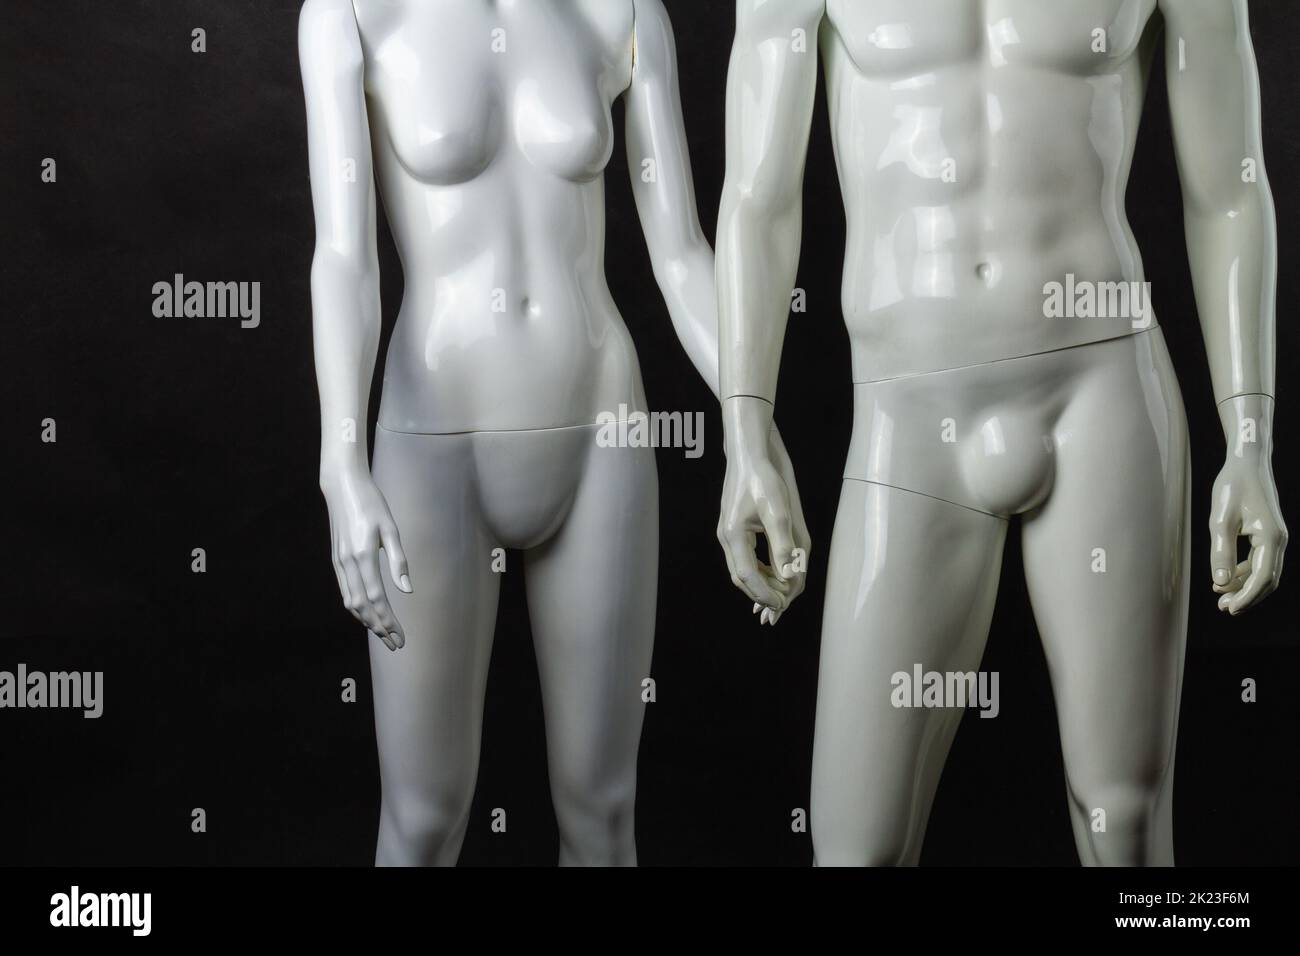 Holding hands of male and female mannequins. Isolated on black background. Stock Photo